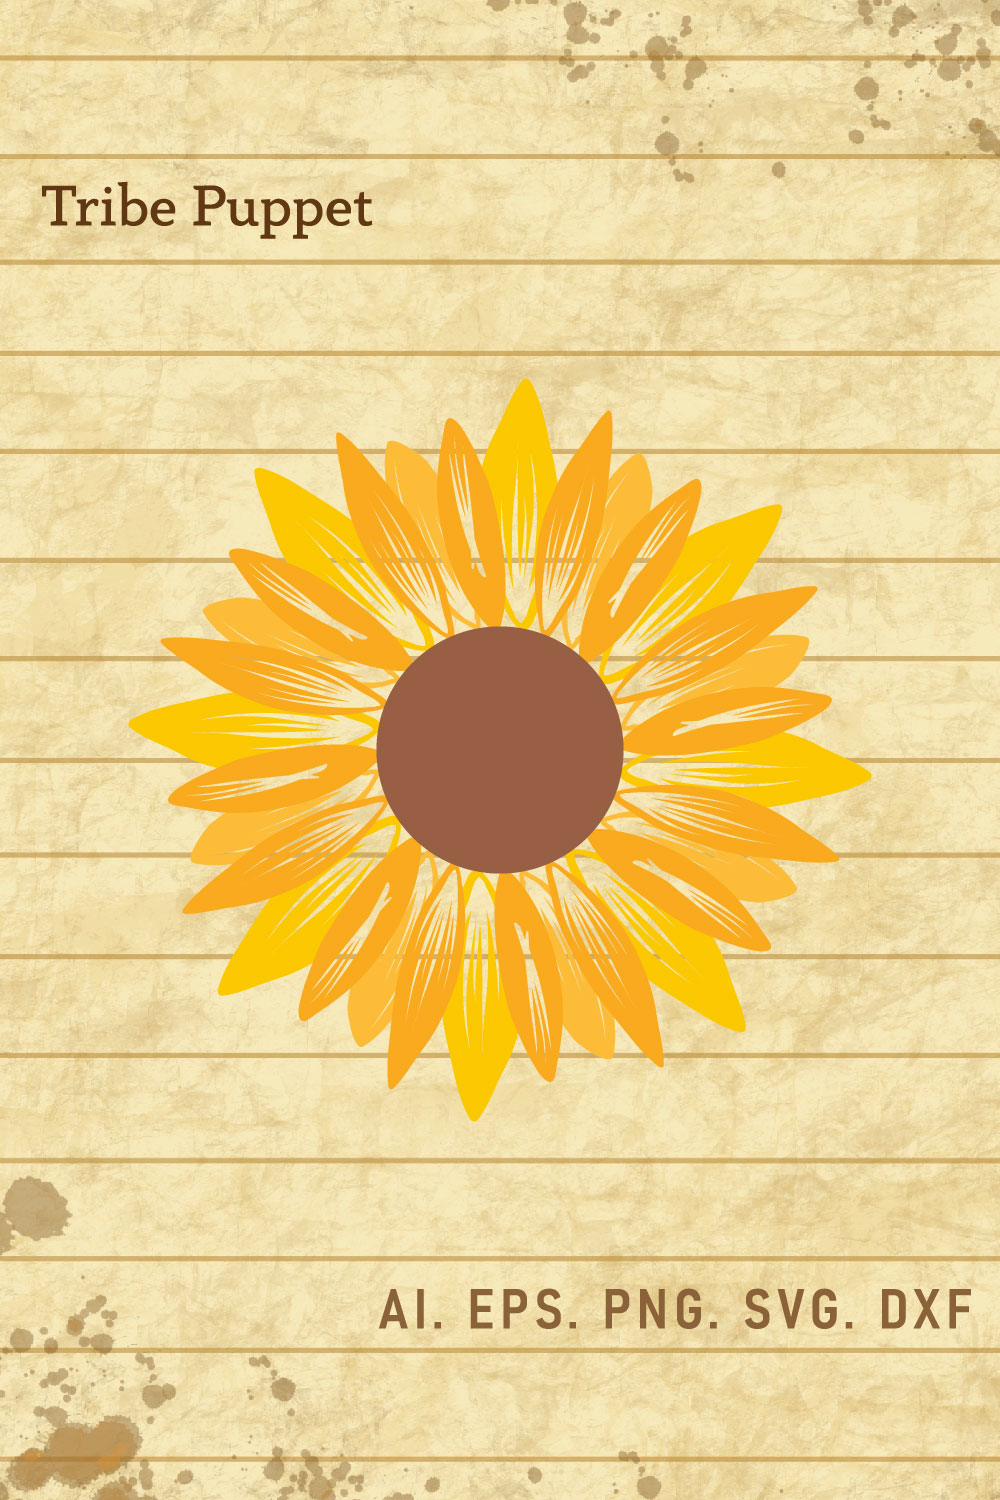 Sunflower 10 pinterest preview image.